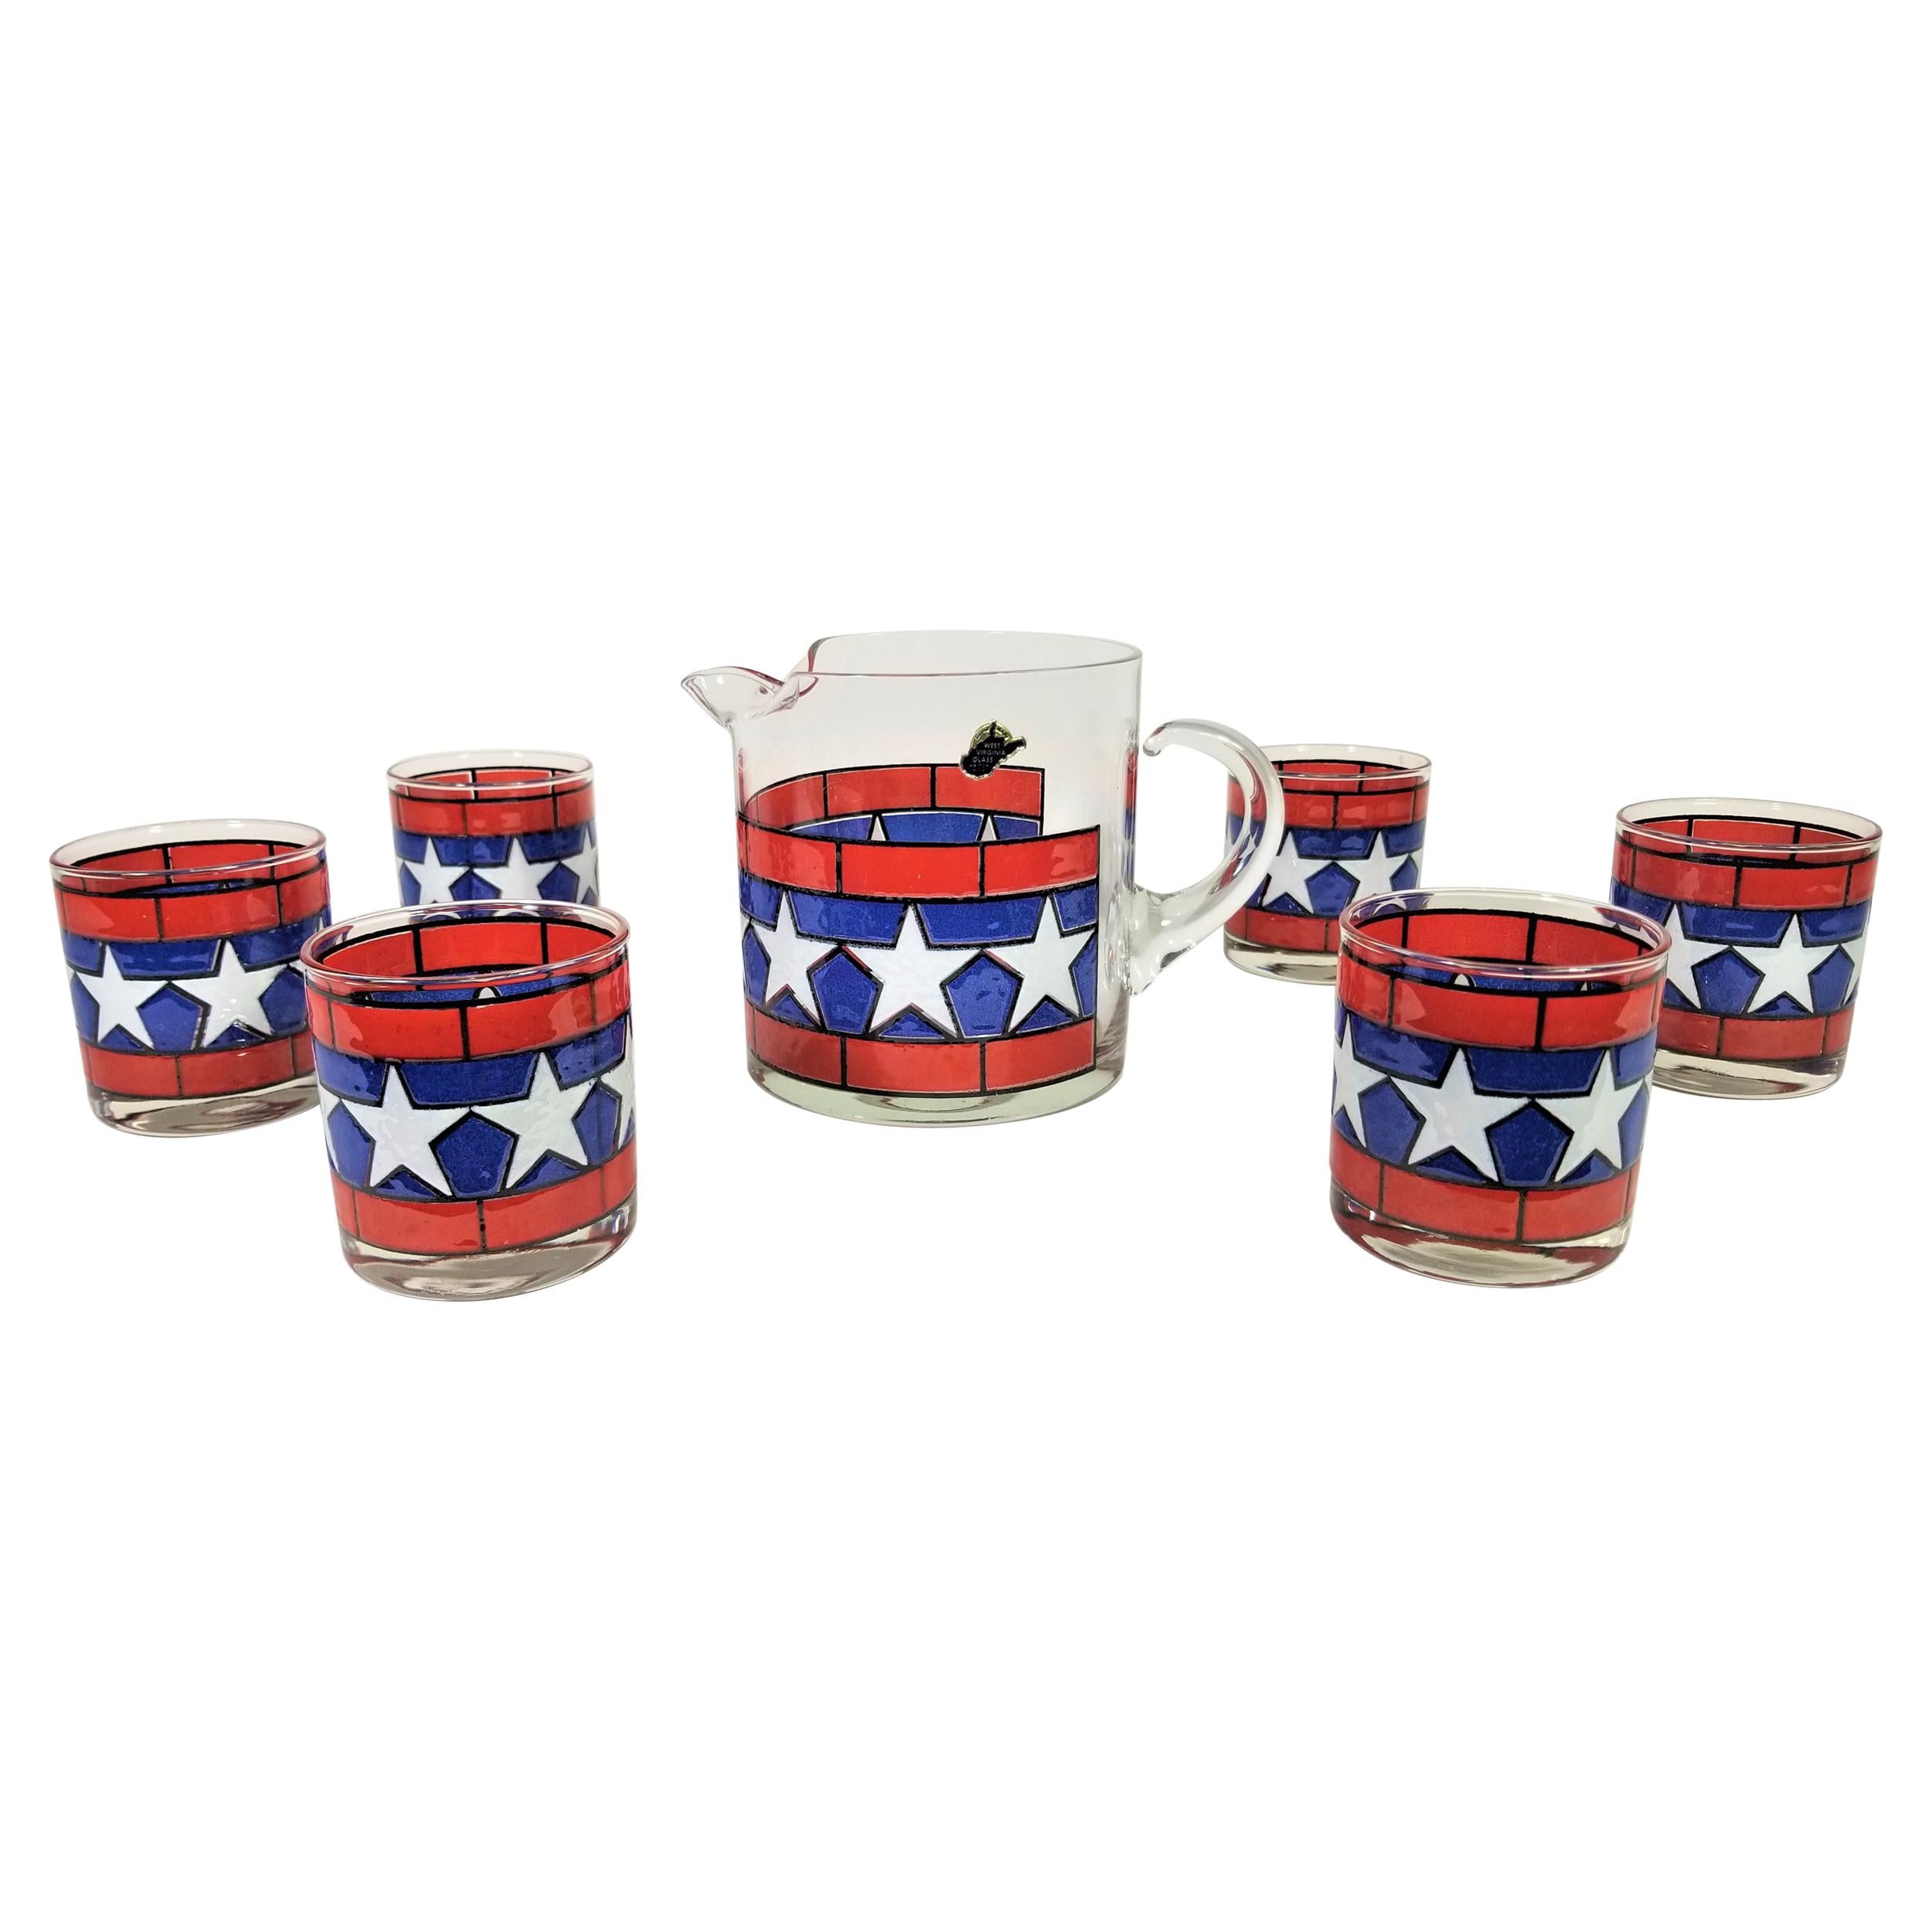 1970s, Red, White and Blue with Stars Glassware Barware Set of 6 with Pitcher For Sale